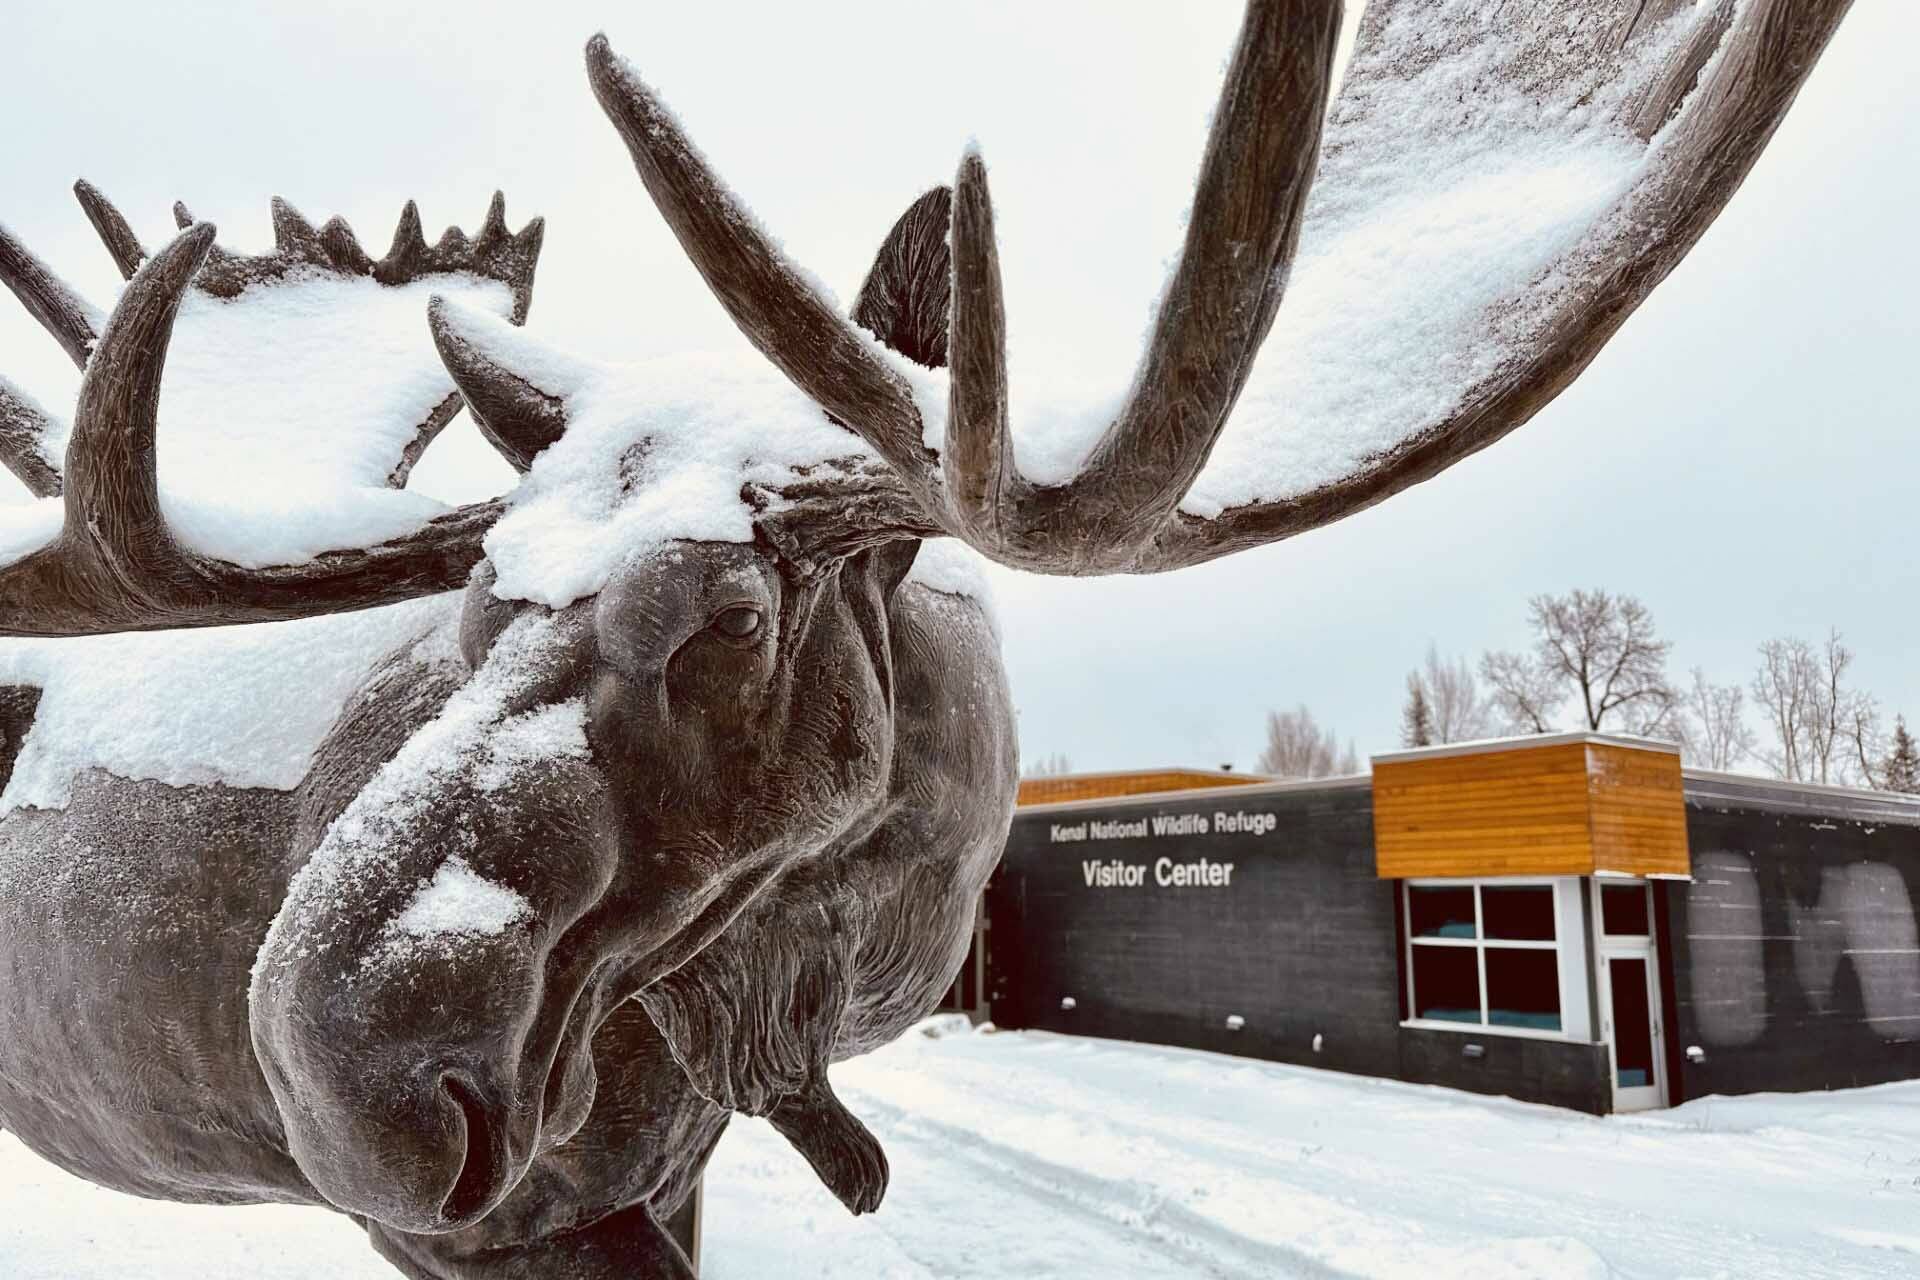 The bronze statue depicting a "giant Kenai Moose" of the early "19s" stands to welcome present-day guests to the Kenai National Wildlife Refuge Visitor Center in Soldotna, Alaska. (Photo by USFWS)